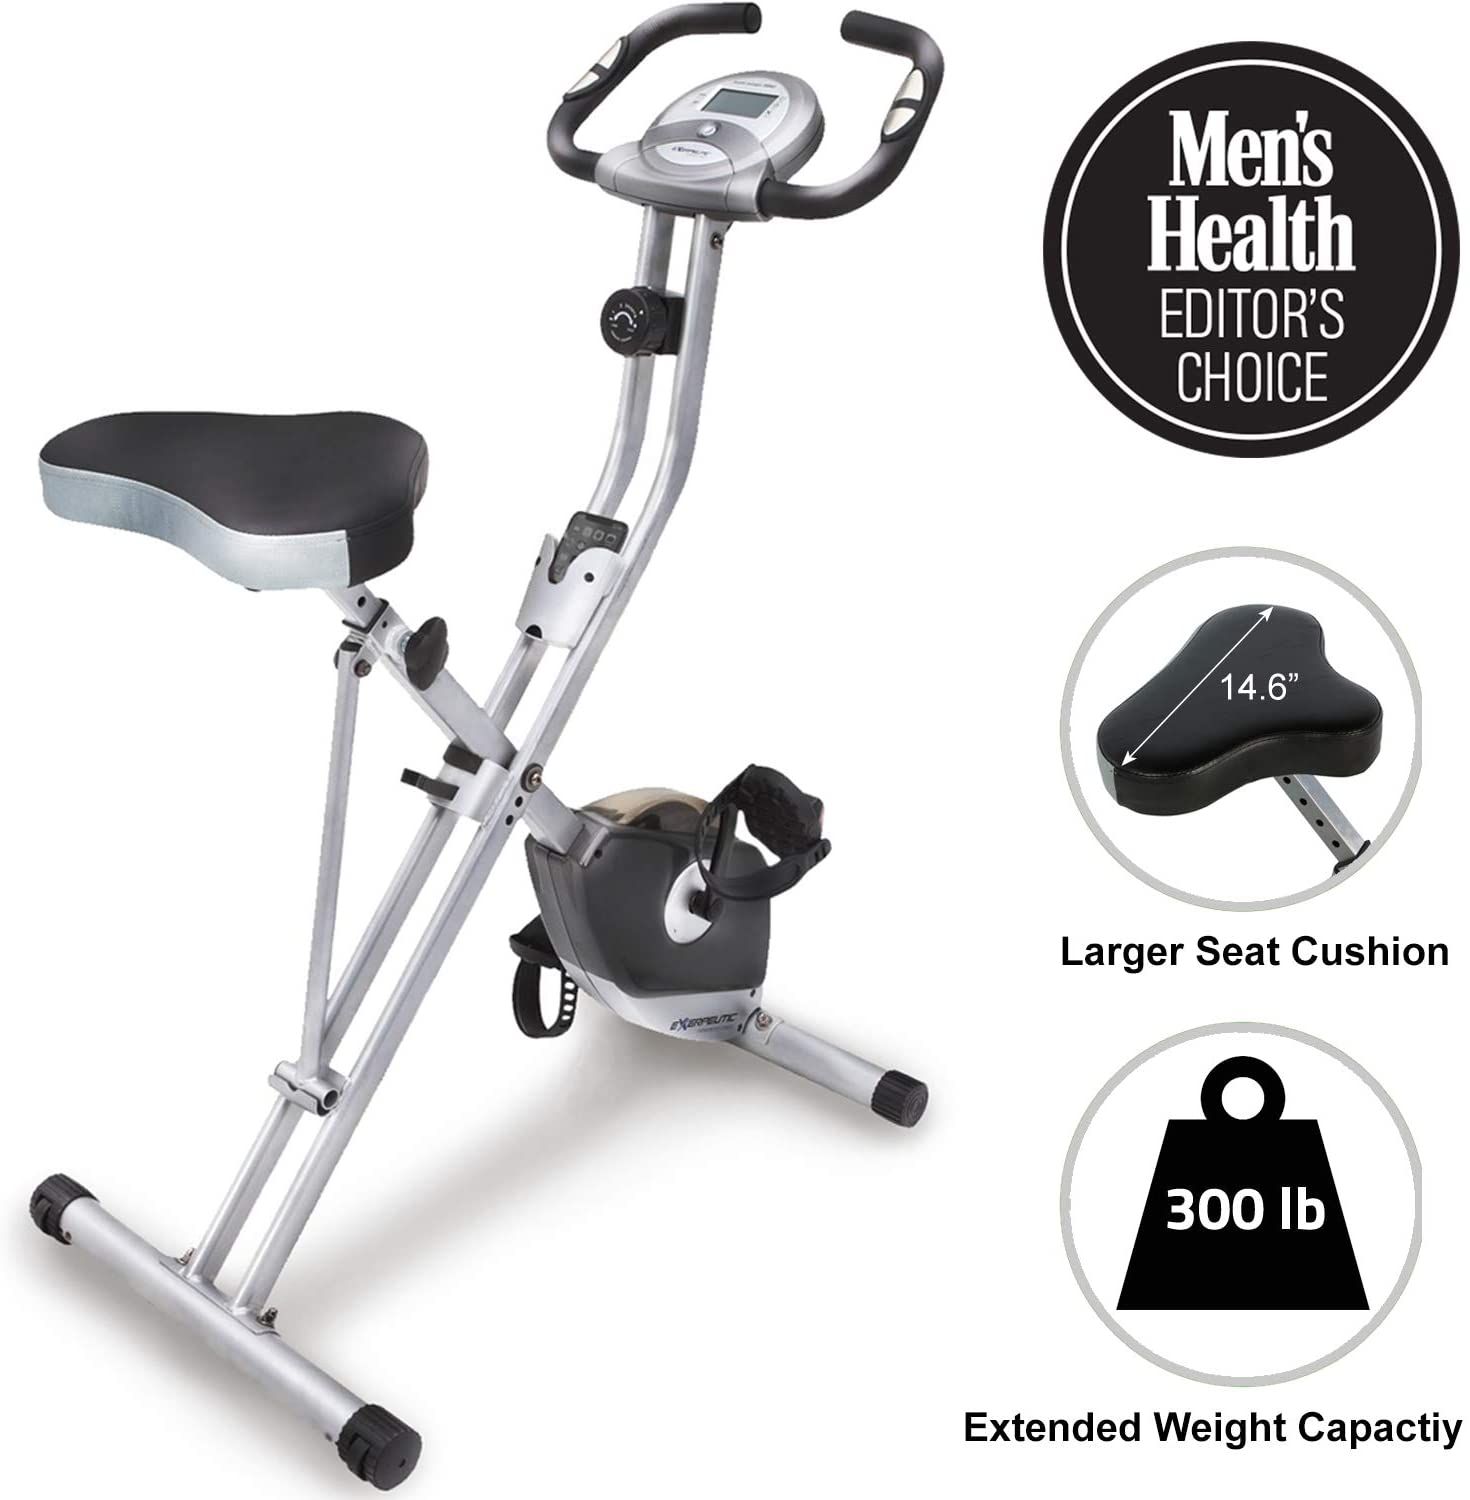 Exerpeutic Folding Magnetic Upright Exercise Bike features